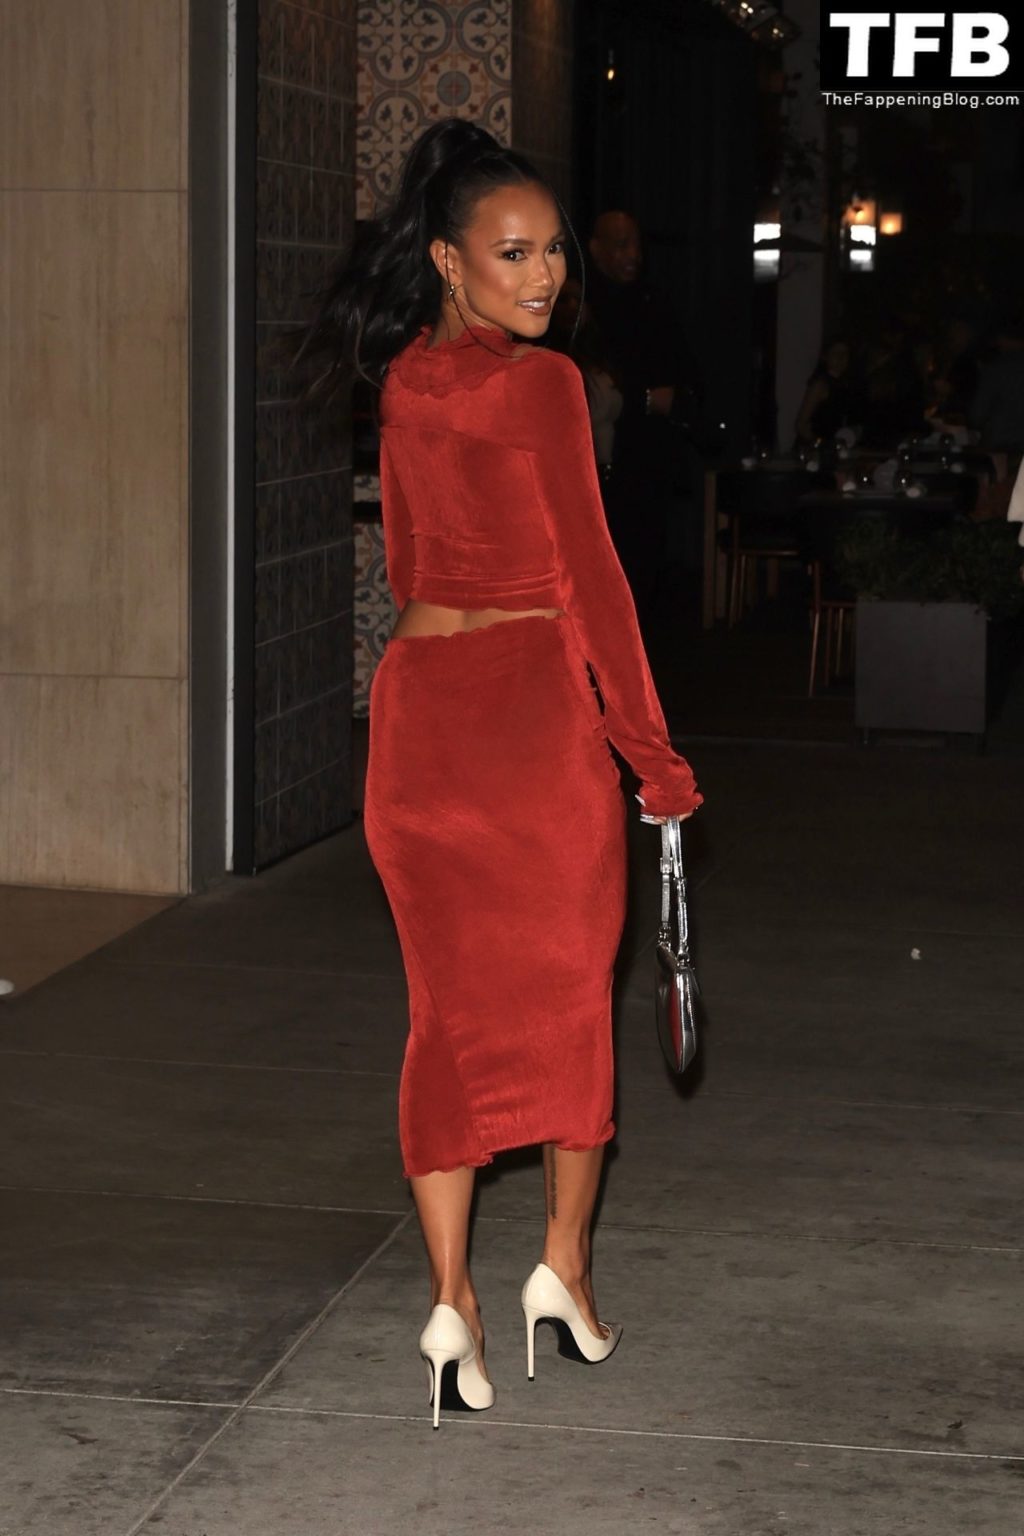 Karrueche Tran Sexy The Fappening Blog 24 1 1024x1536 - Karrueche Tran Shows Her Pokies in a Red Dress at The Hollywood Reporter’s Oscar Nominees Night (68 Photos)